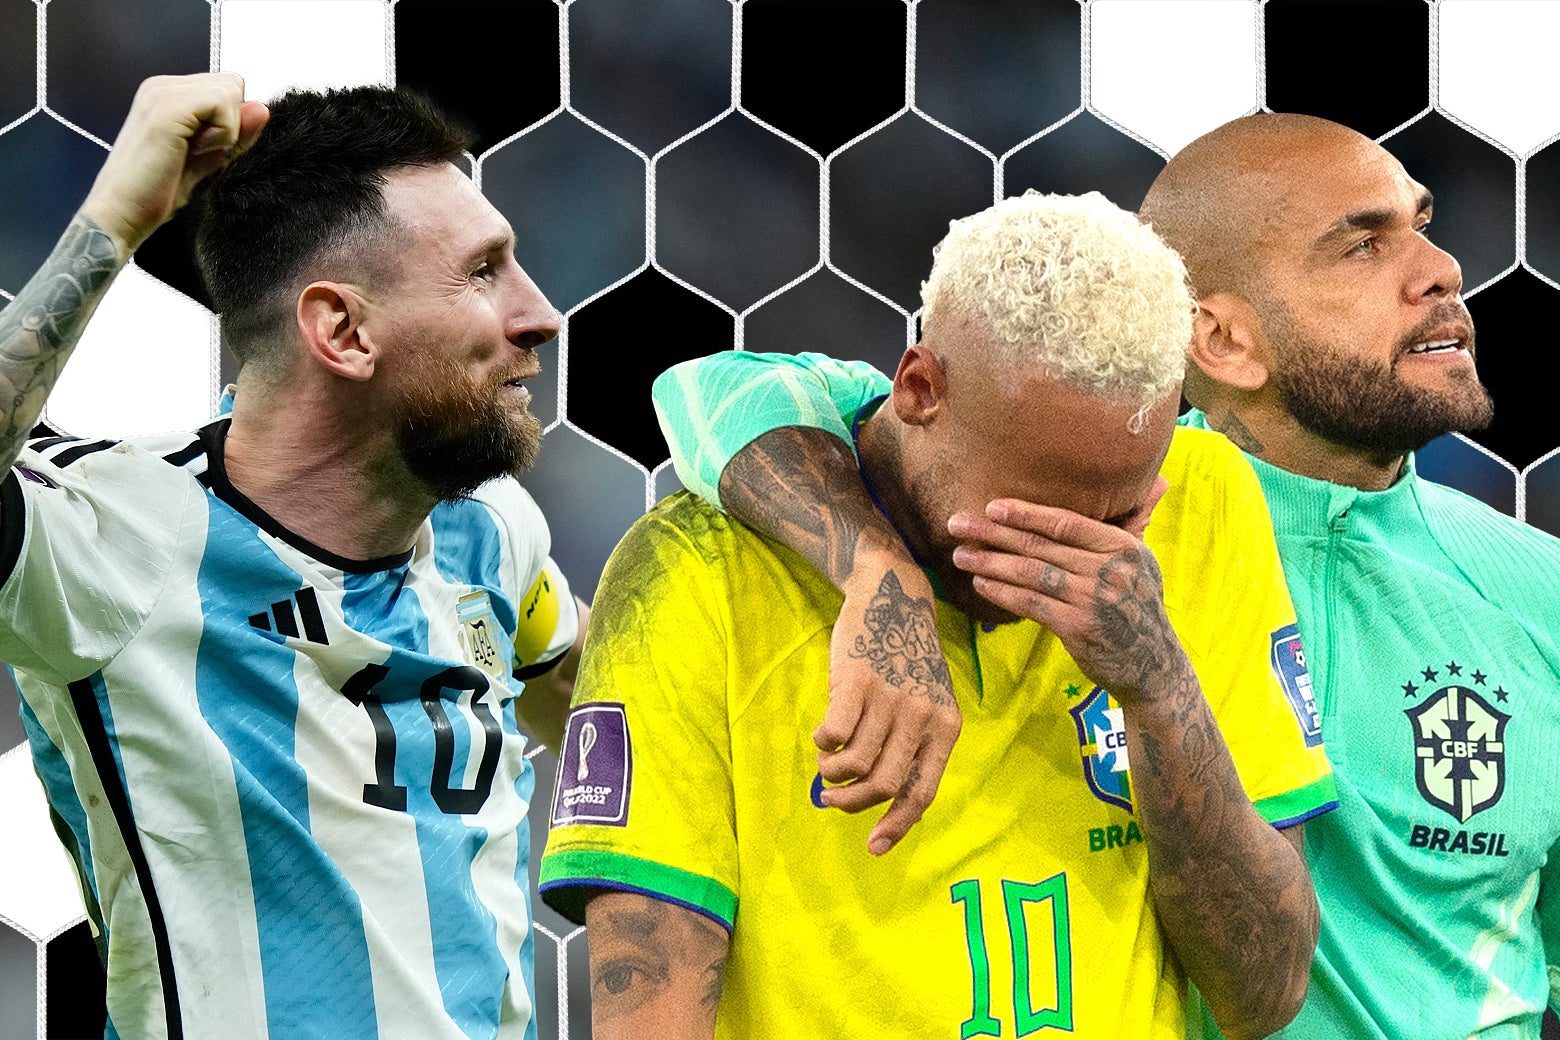 Messi cheering, Neymar crying with his teammate's arm around his shoulder